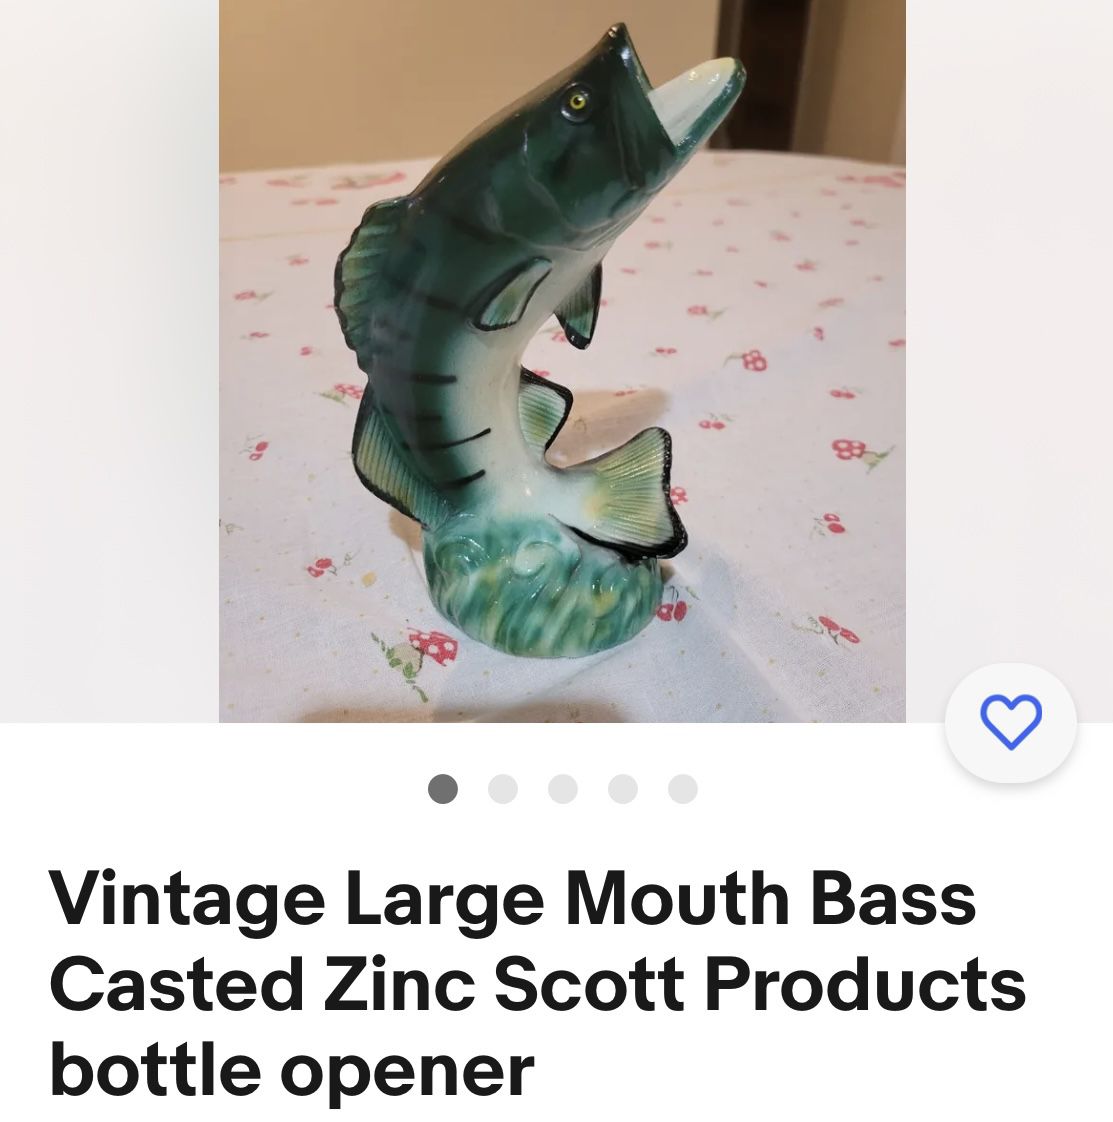 Vintage post 1950’s standing large mouth bass casted zinc bottle opener 